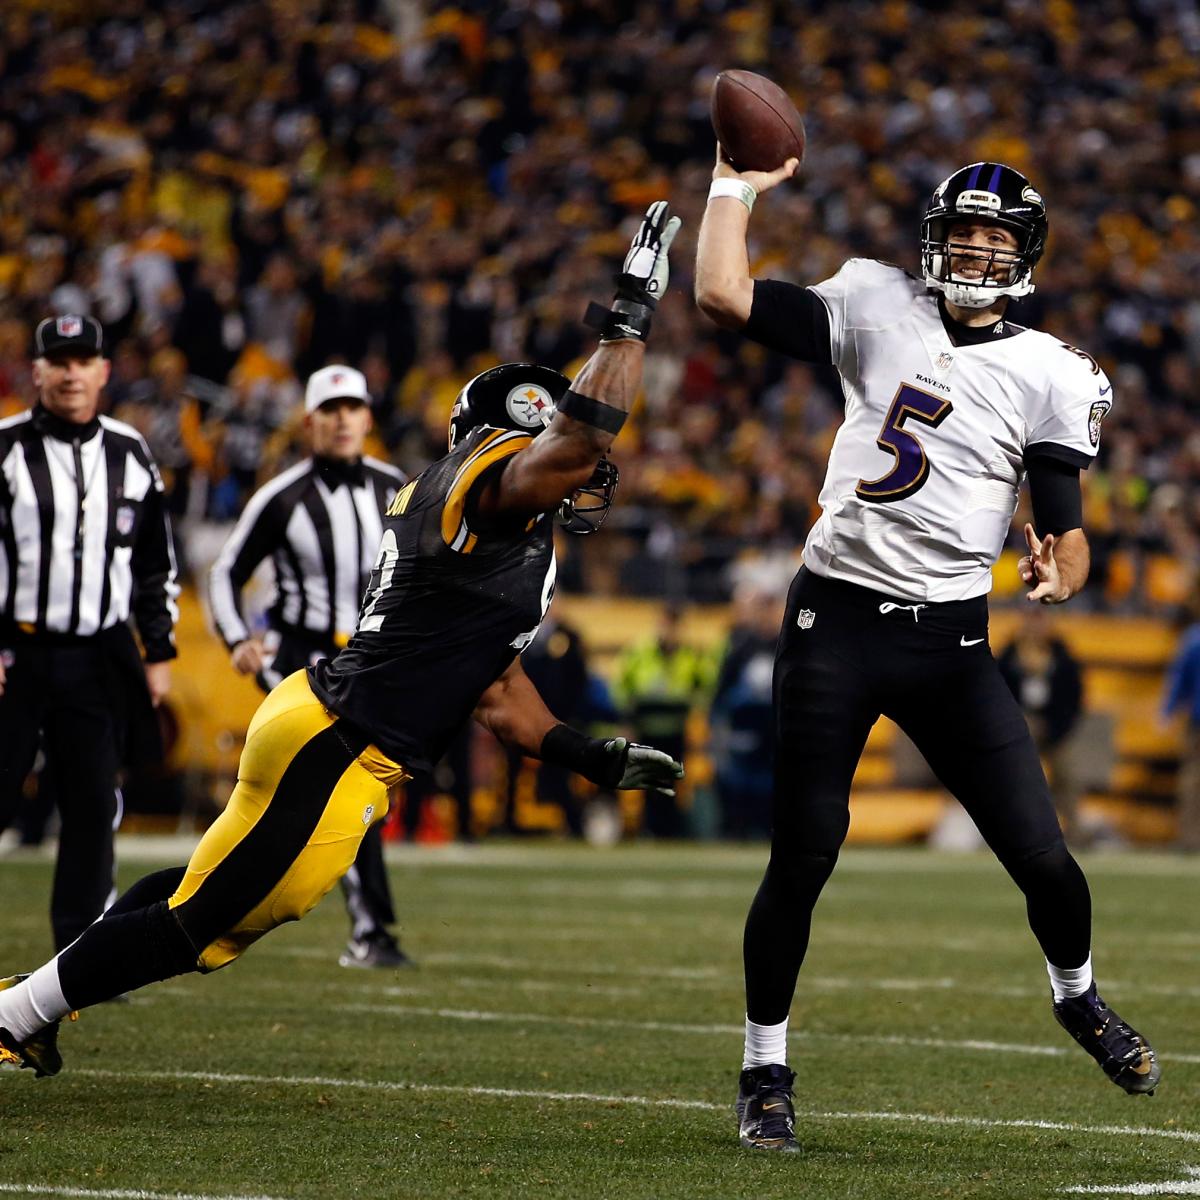 Ravens vs. Steelers Final Score, Highlights from 2015 AFC